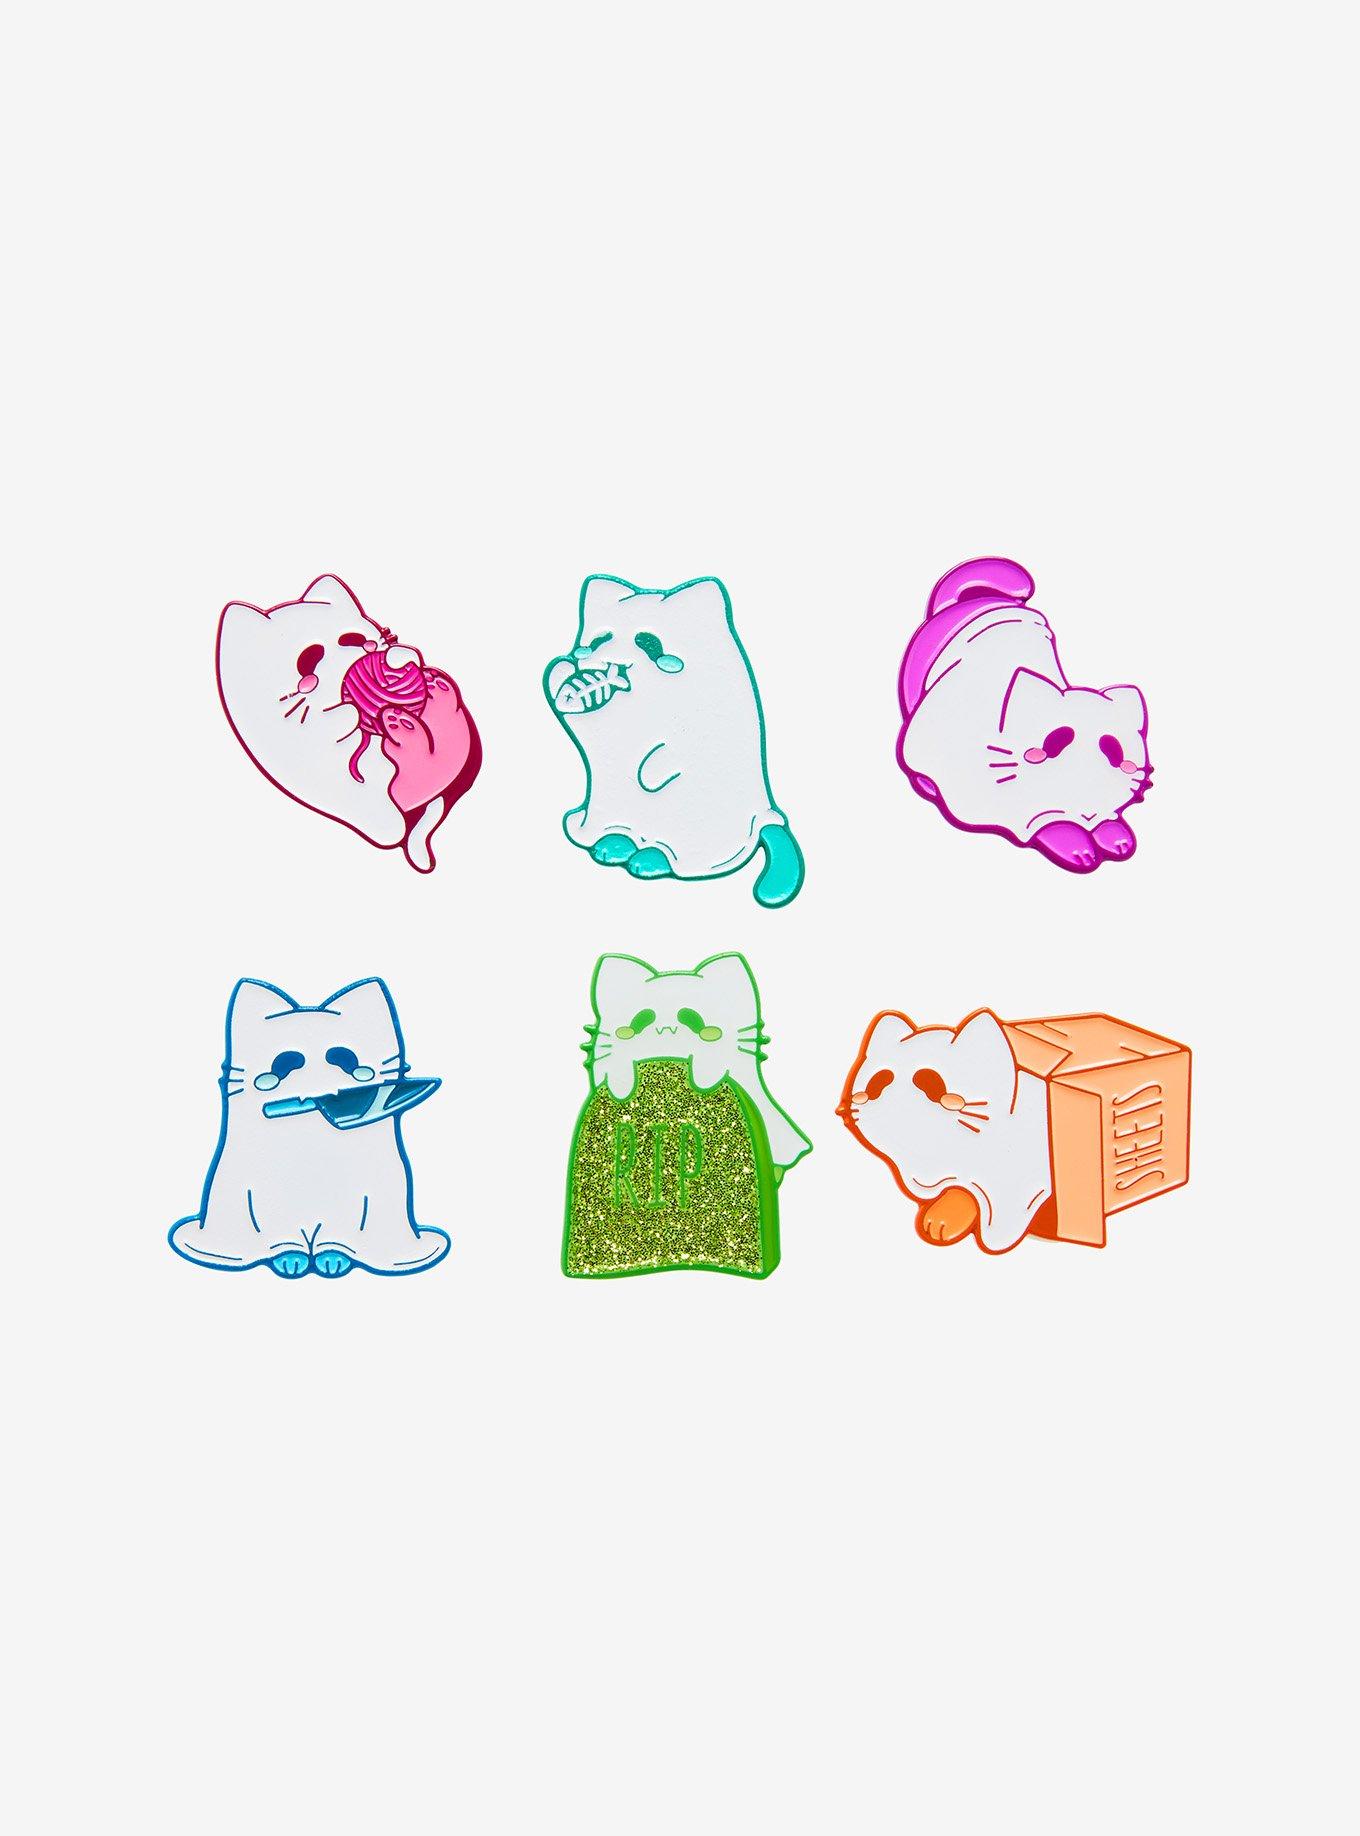 Ghost Cat Stickers